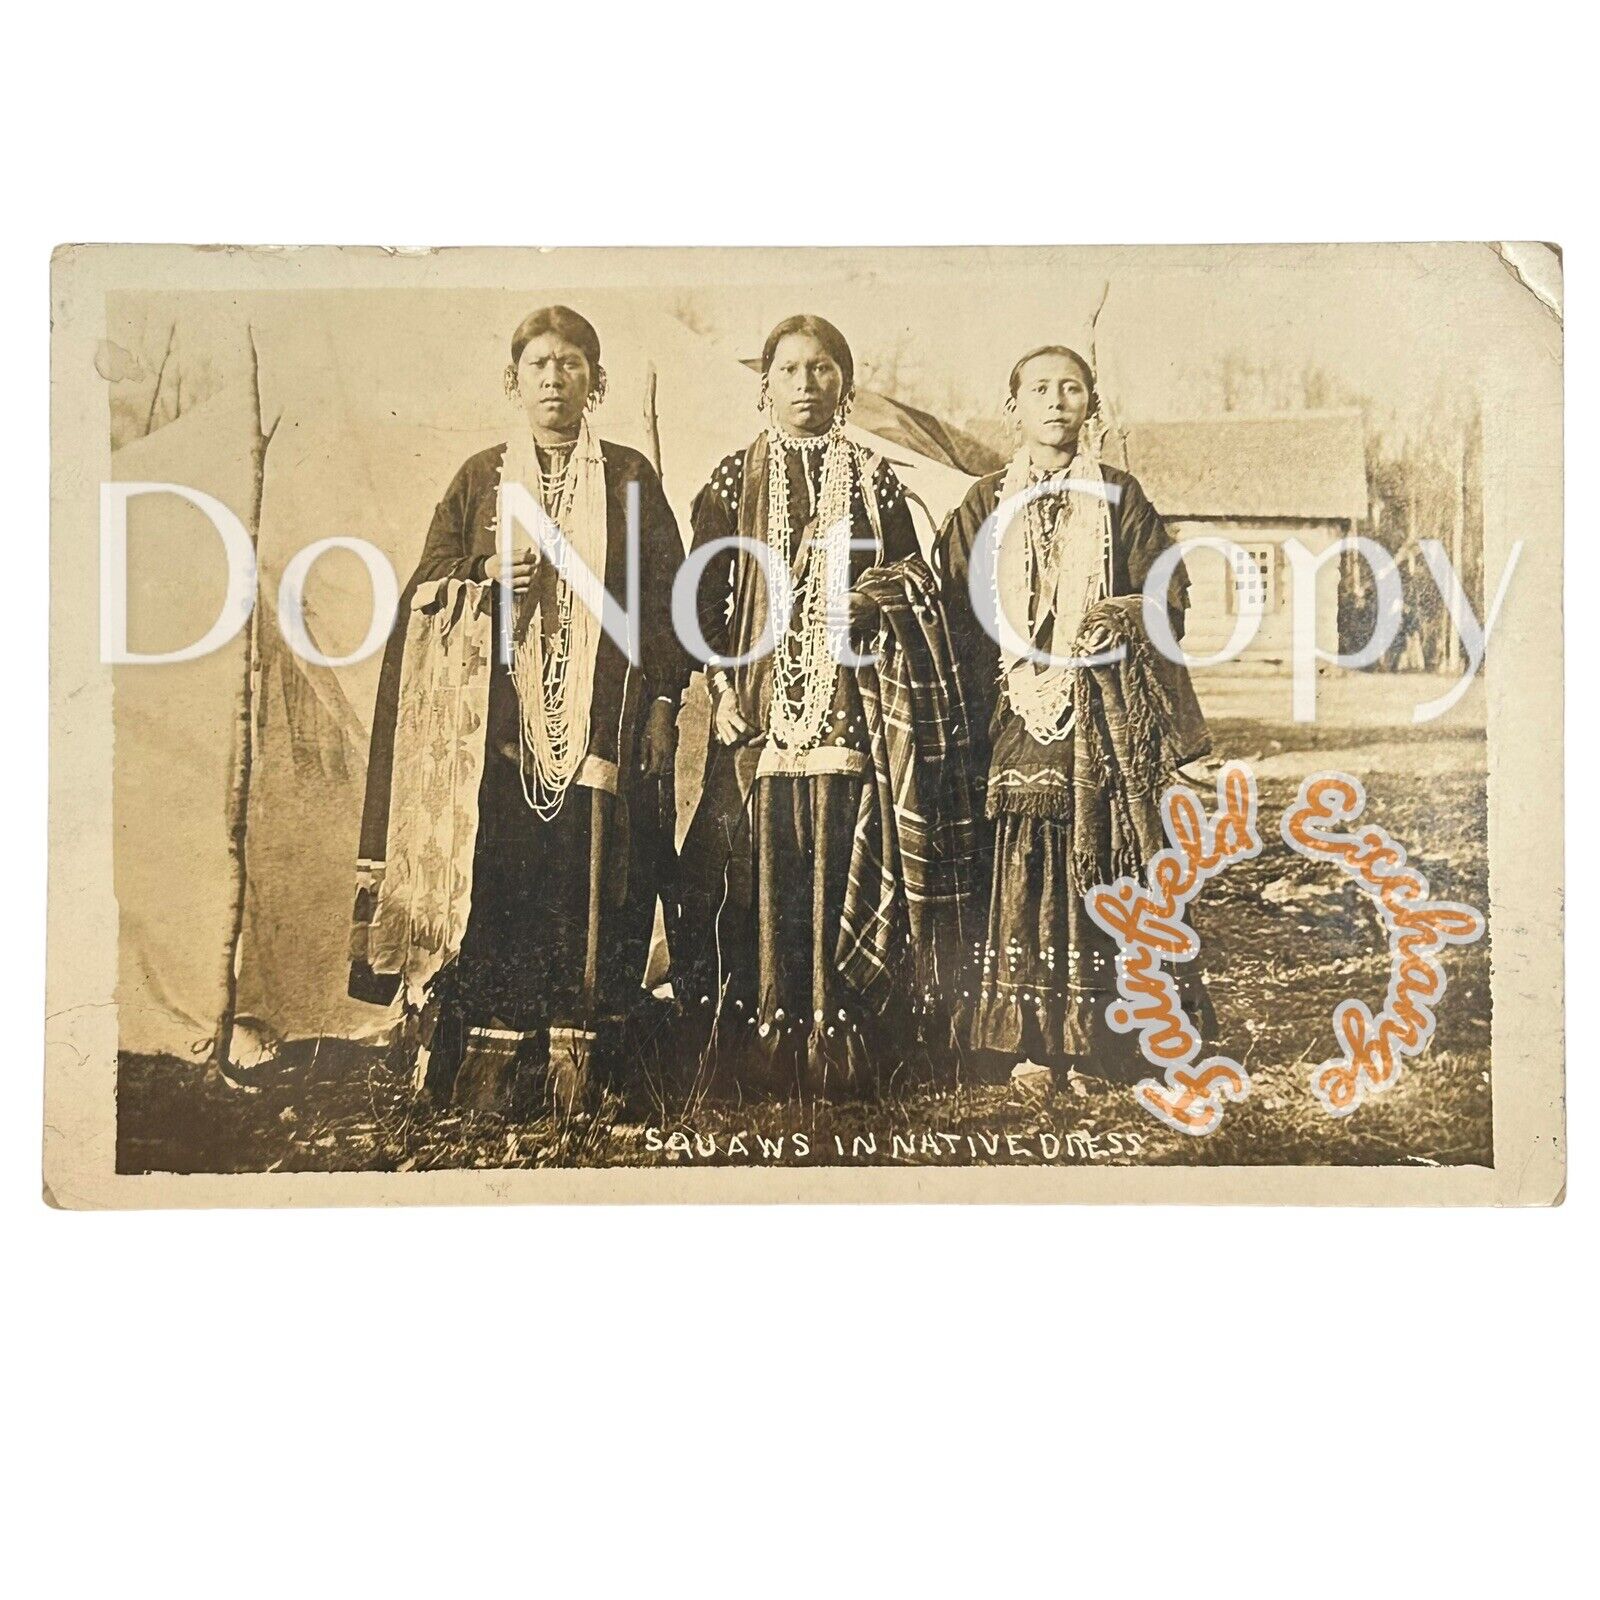 RARE 1919 ANTIQUE SIOUX SQUAW WOMEN IN NATIVE DRESS PHOTO POSTCARD —MAKE OFFER